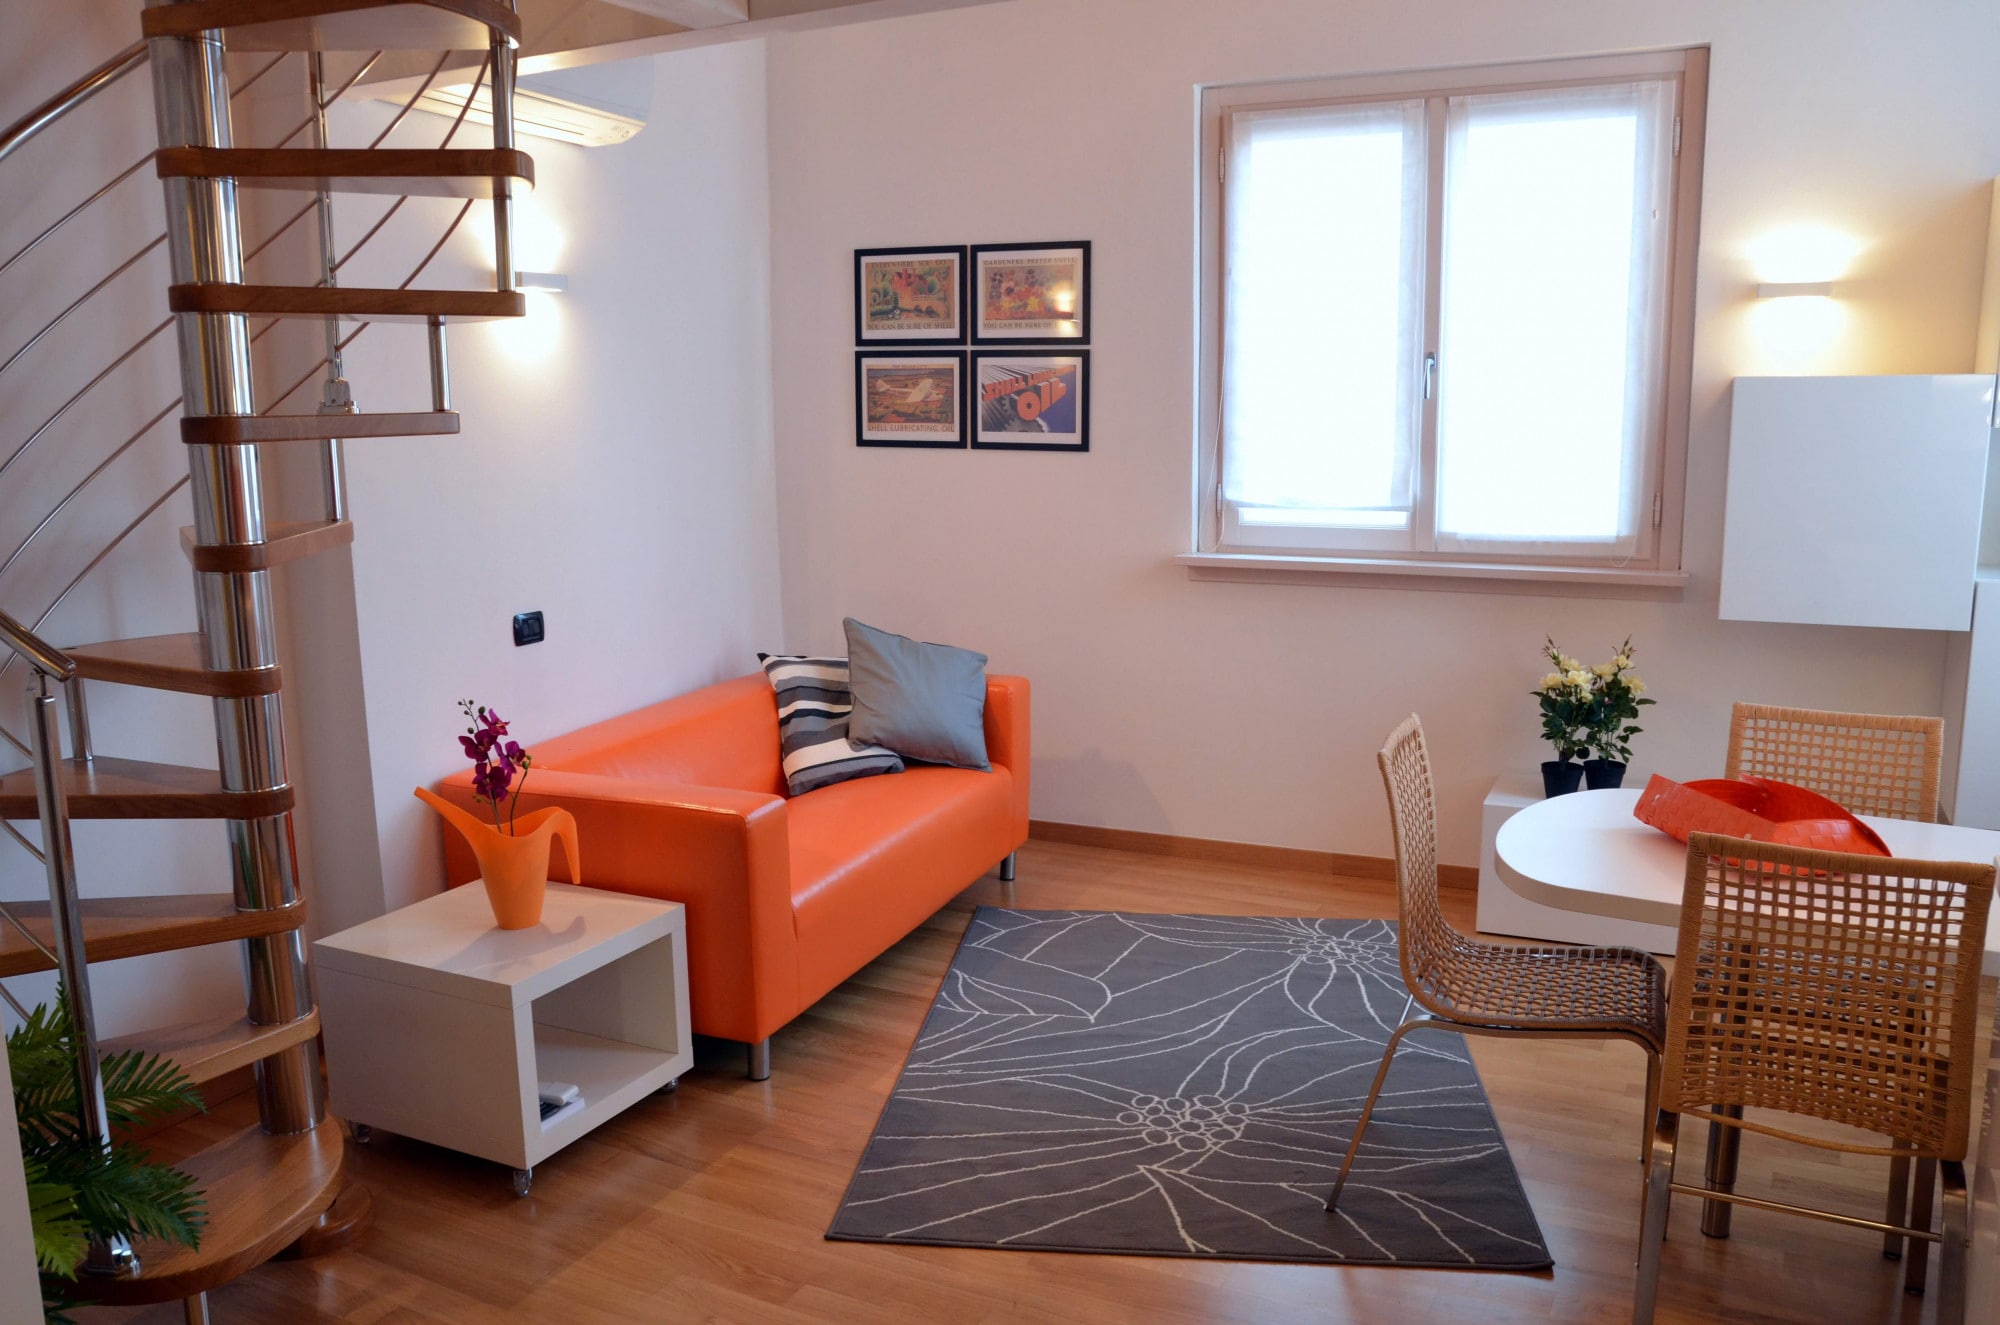 Property Image 1 - Colourful 1 Bedroom Apartment Near Duomo Square and Cathedral